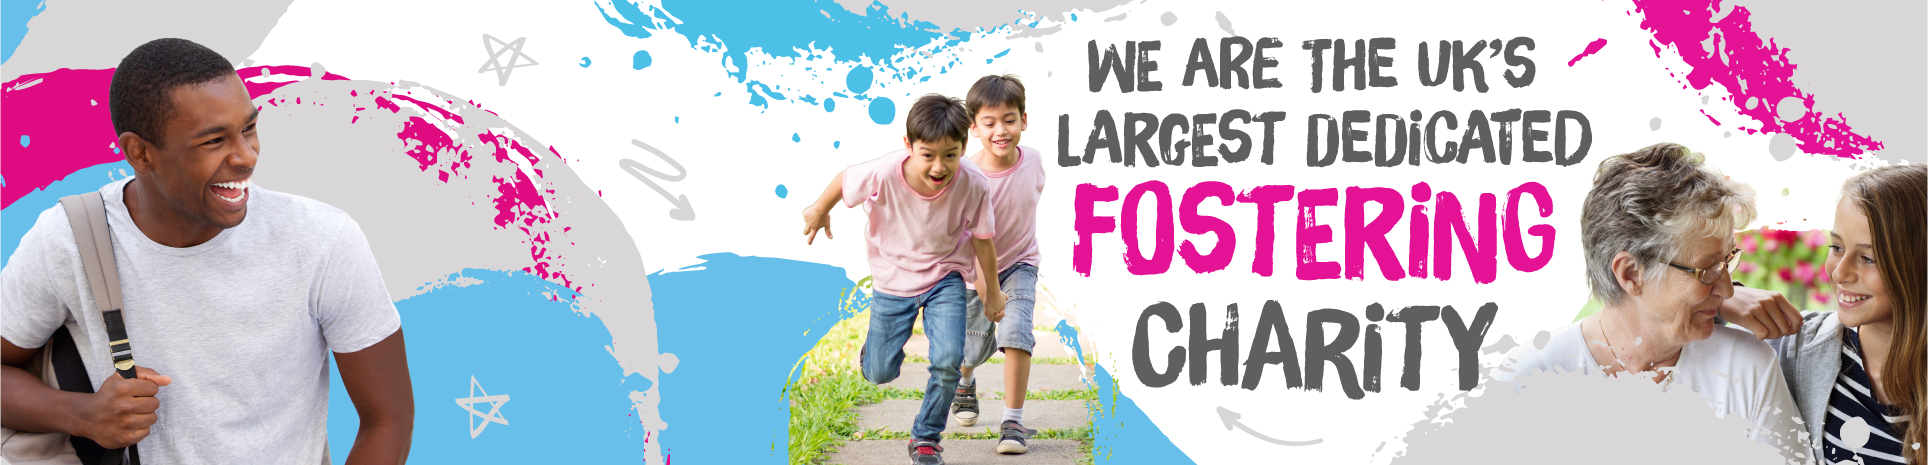 We are the UK's largest dedicated fostering children charity